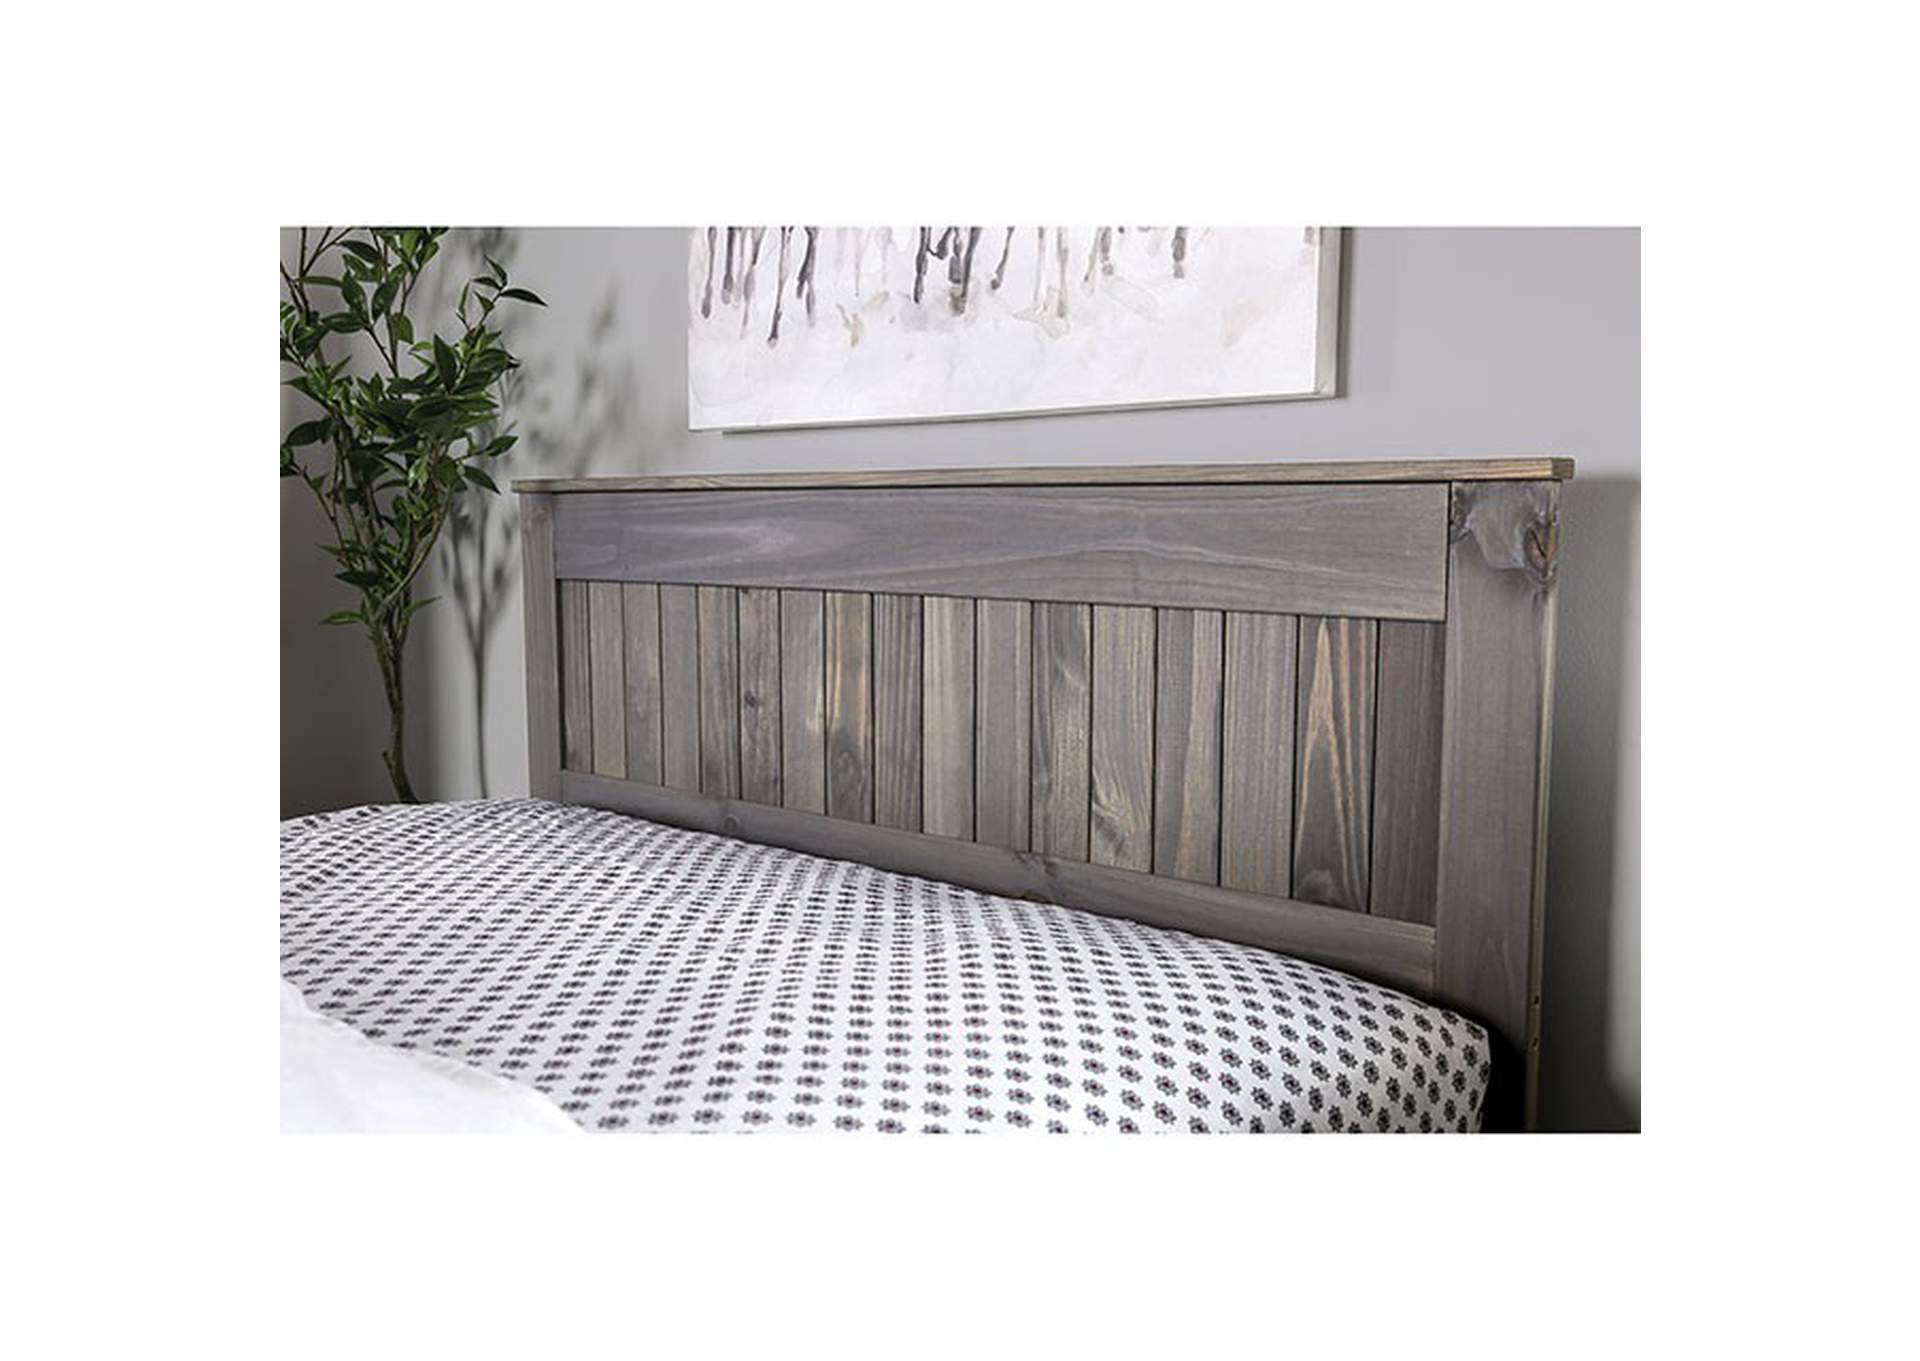 Rockwall Bed,Furniture of America